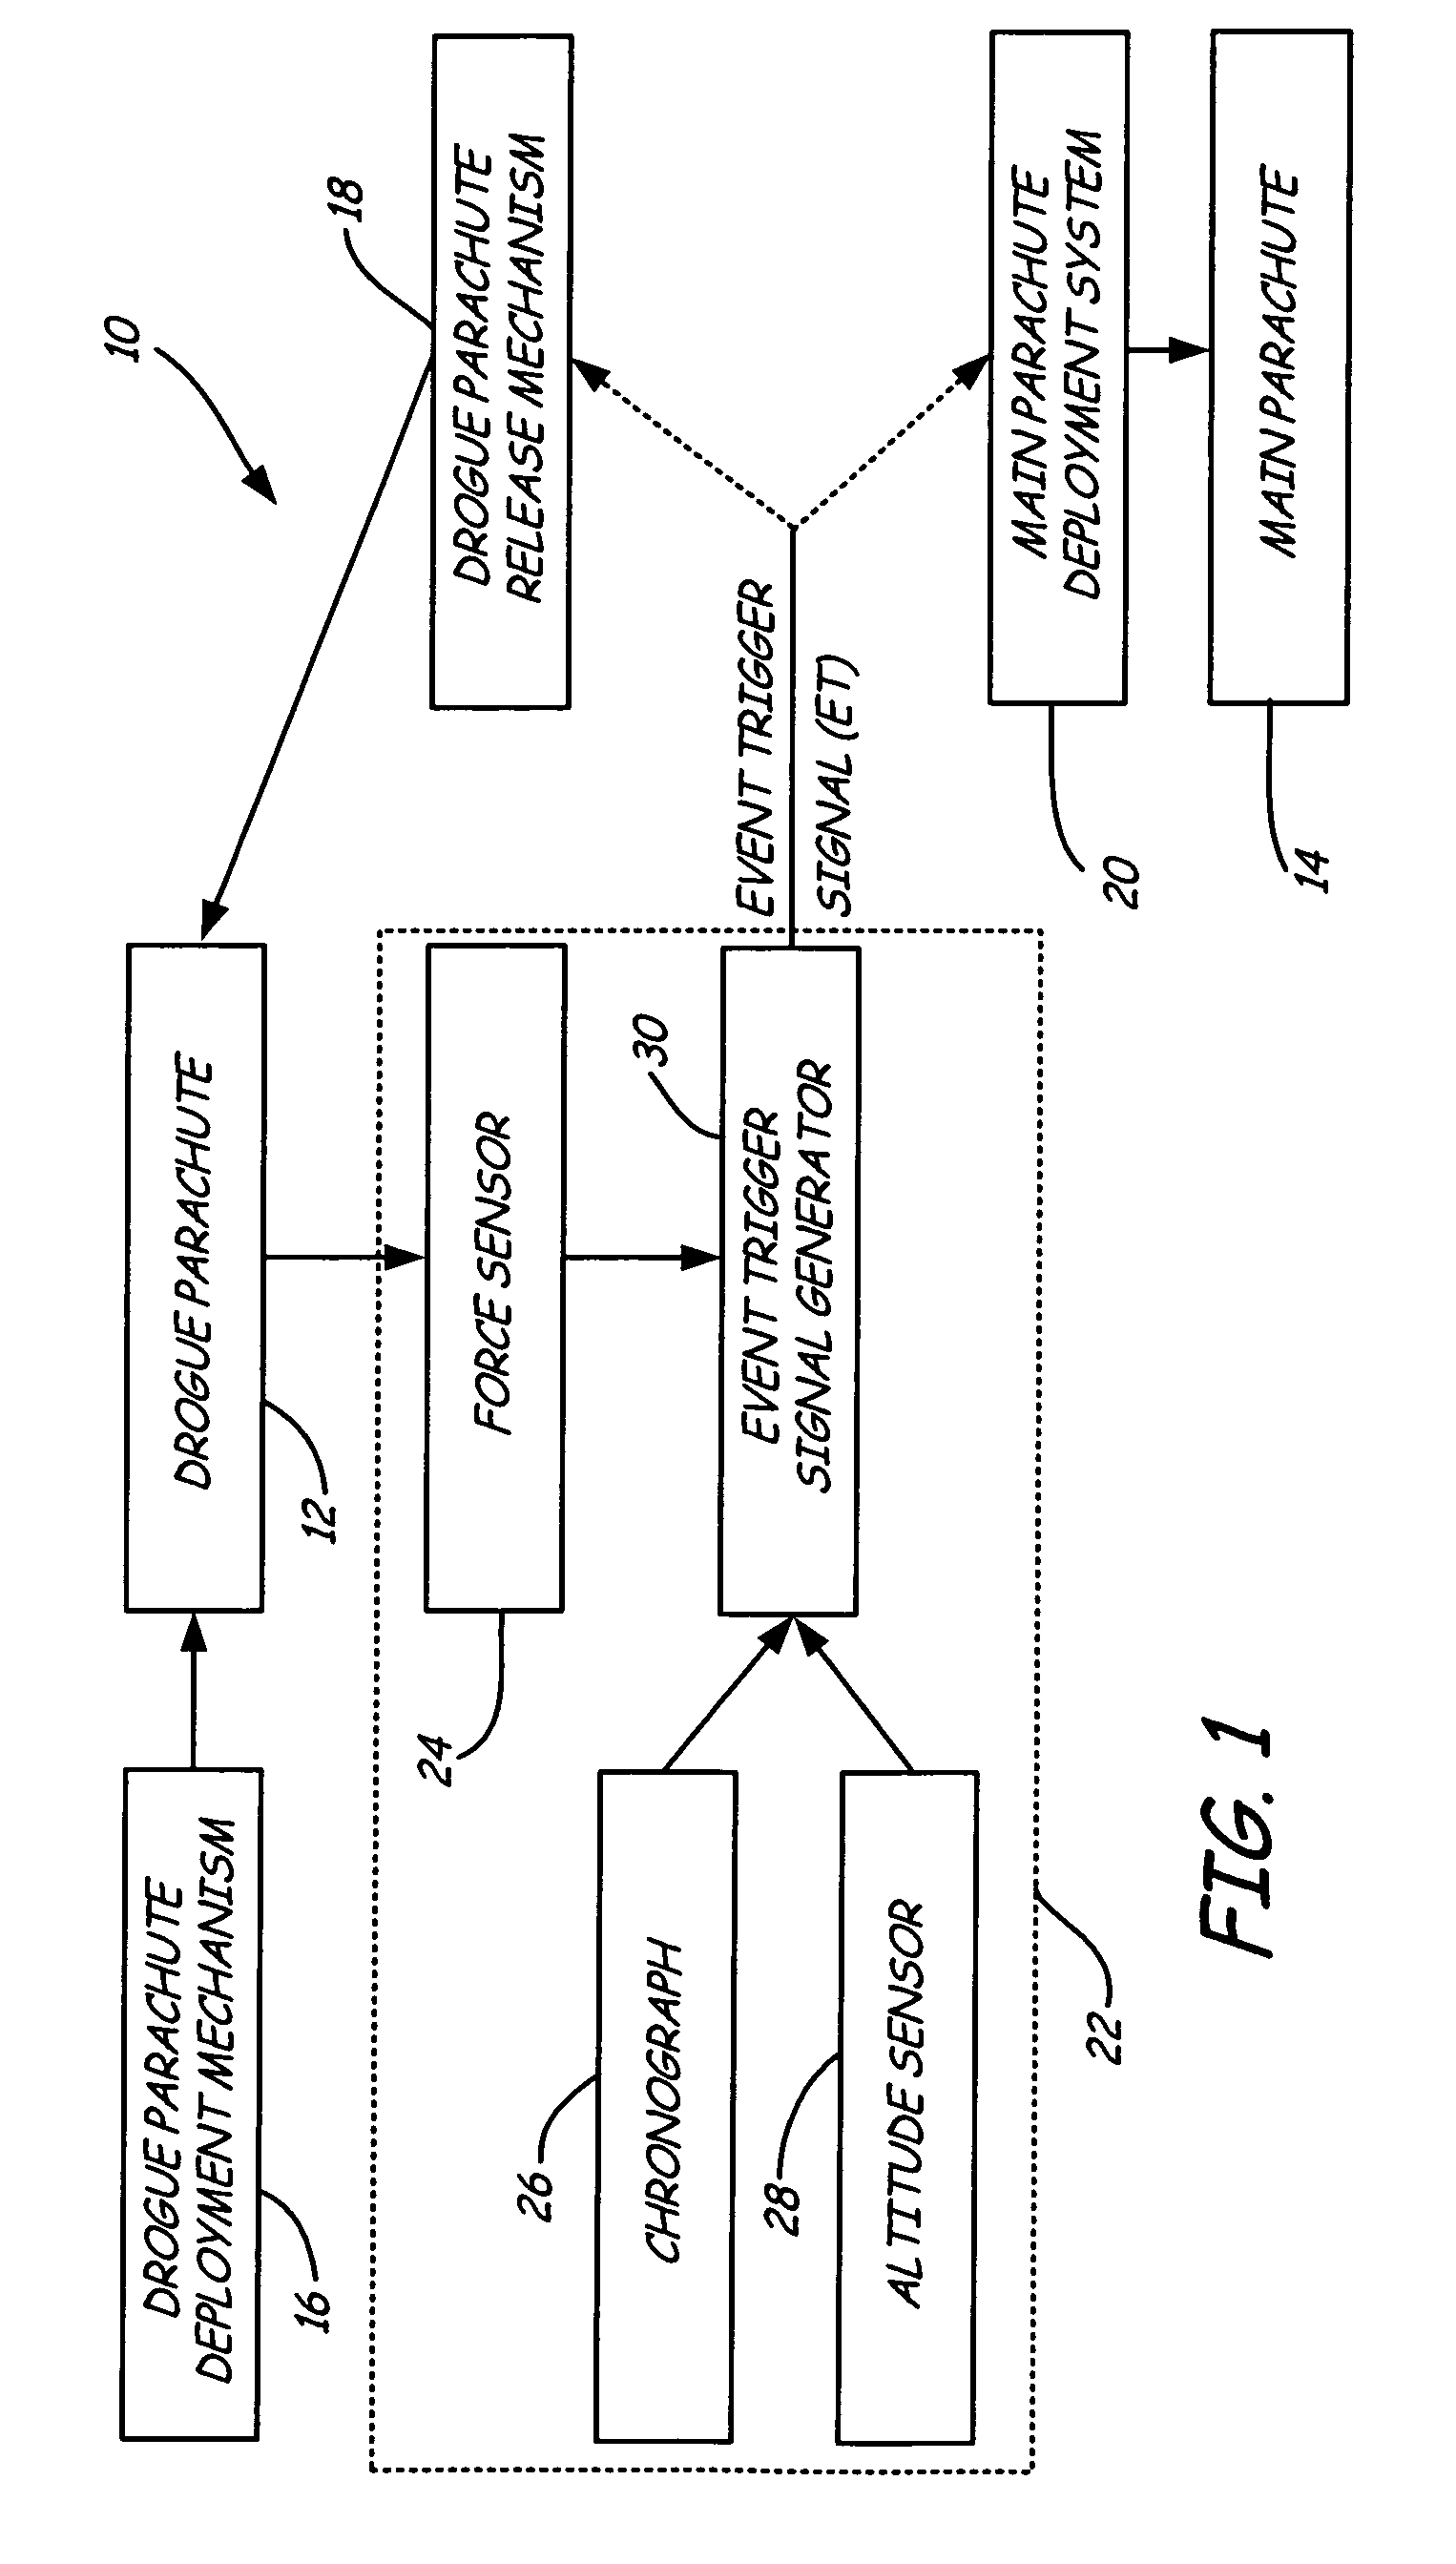 Drogue parachute drag force actuated programmable controller to generate an event trigger signal